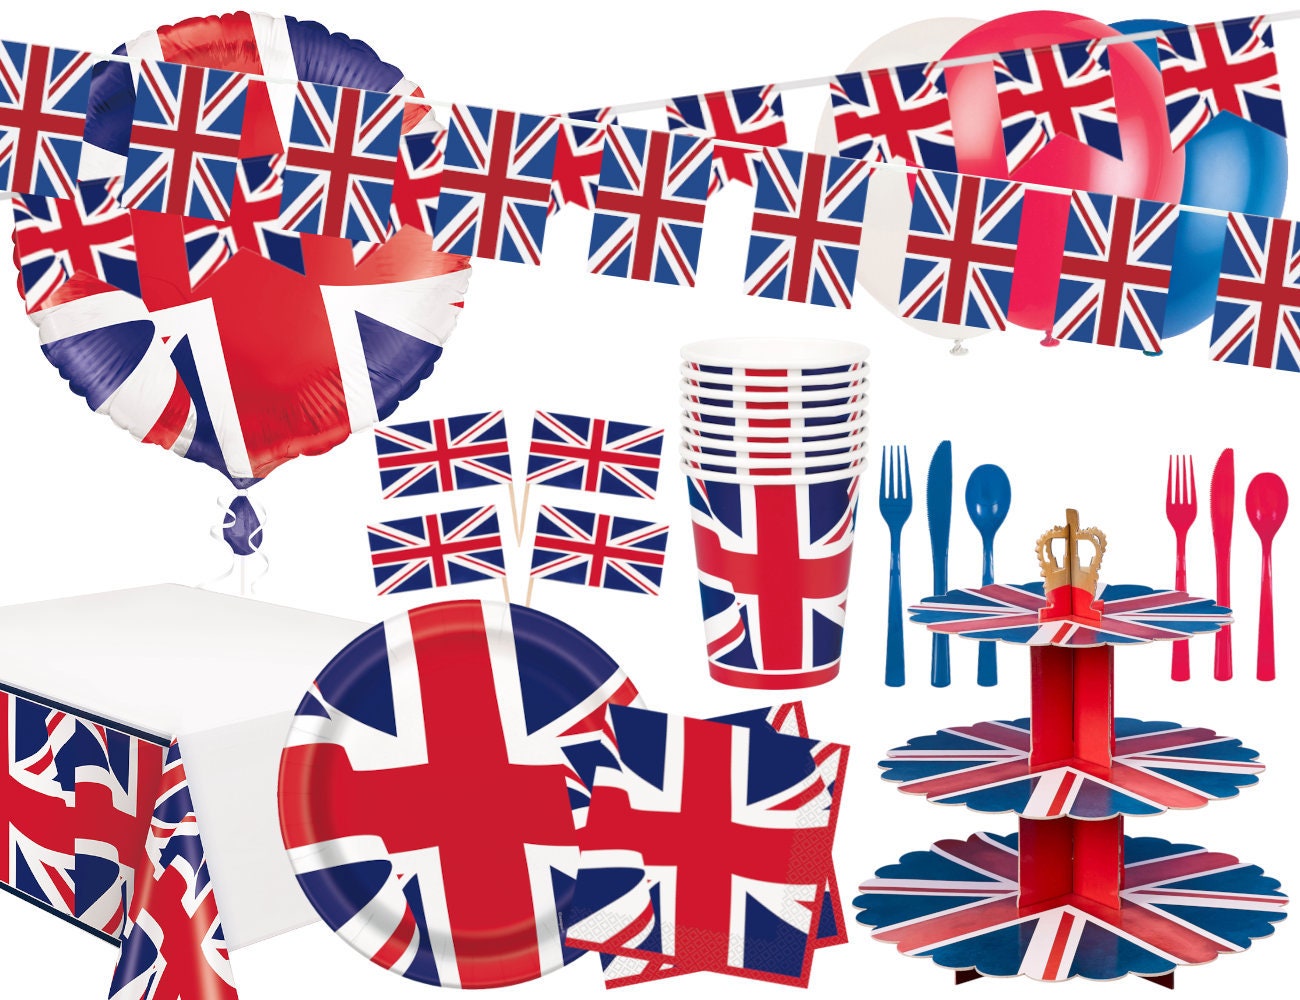 10 Union Jack Red White Blue Balloons Queen Jubilee GB Royal Street Party Decor 